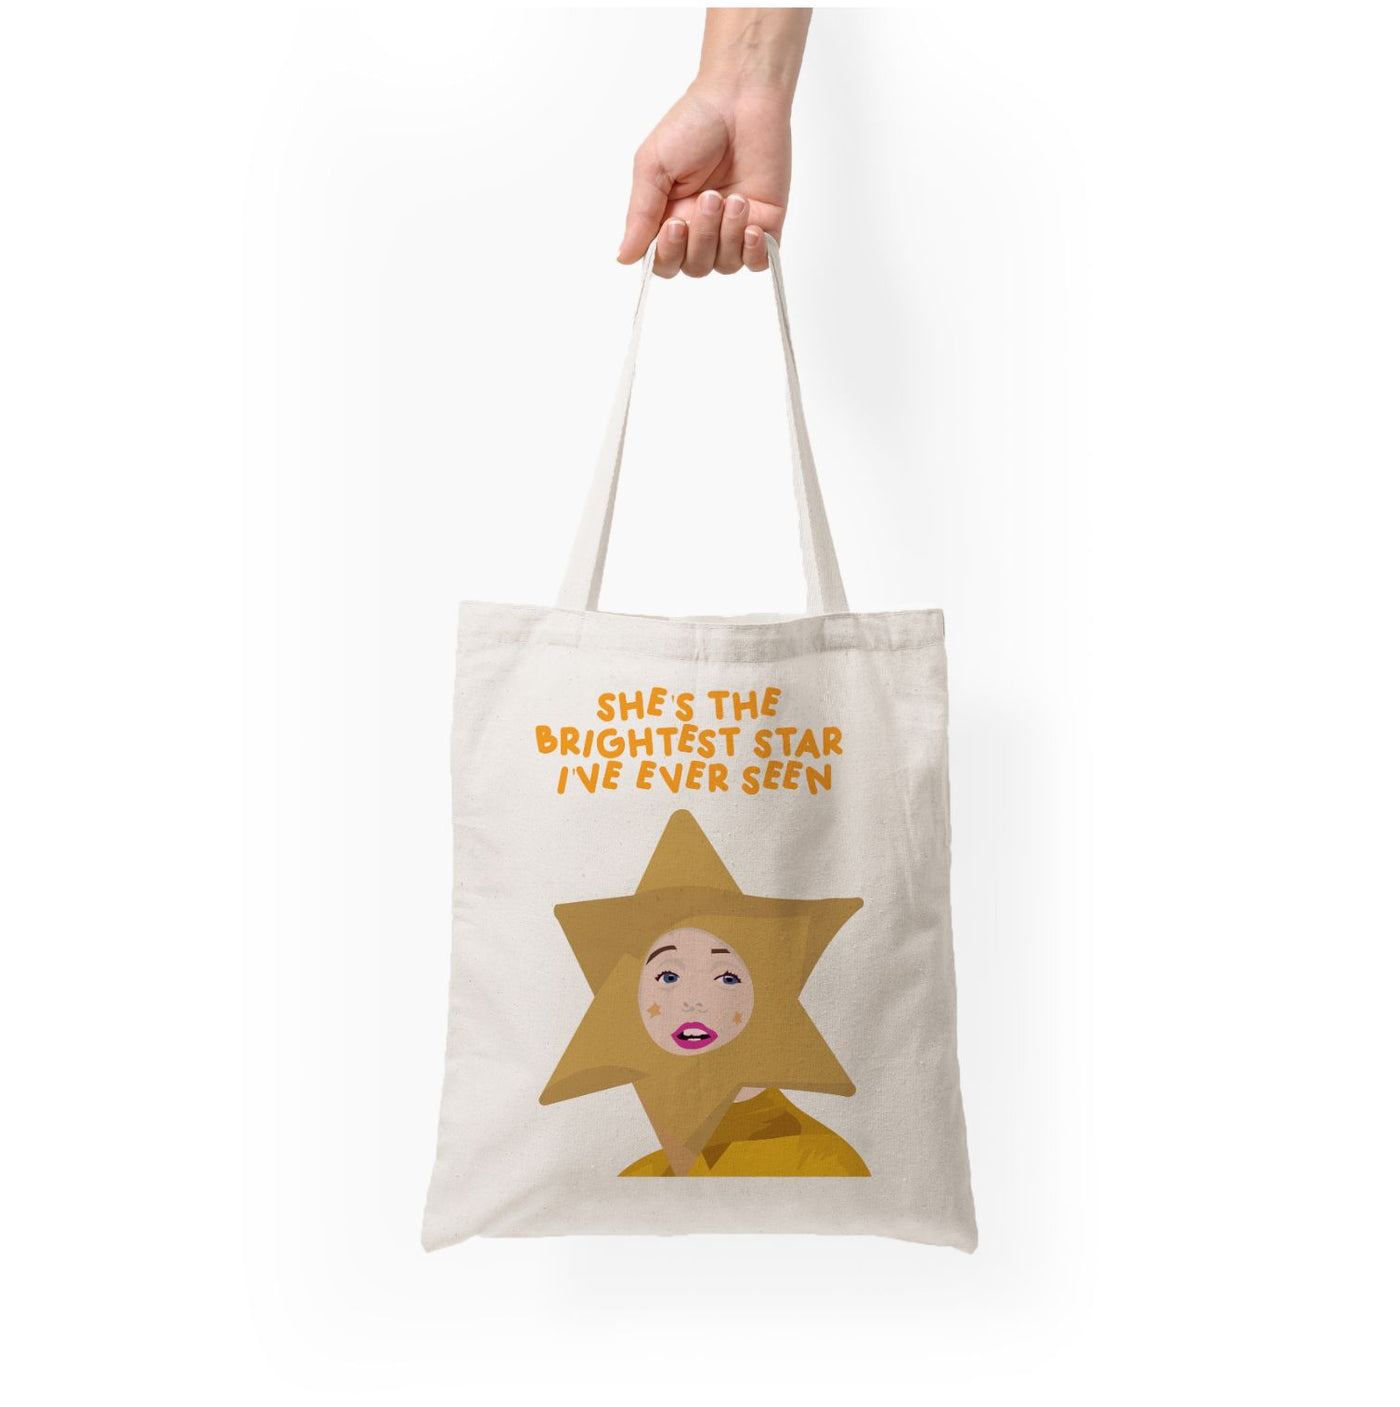 She's The Brightest Star I've Ever Seen - Christmas Tote Bag